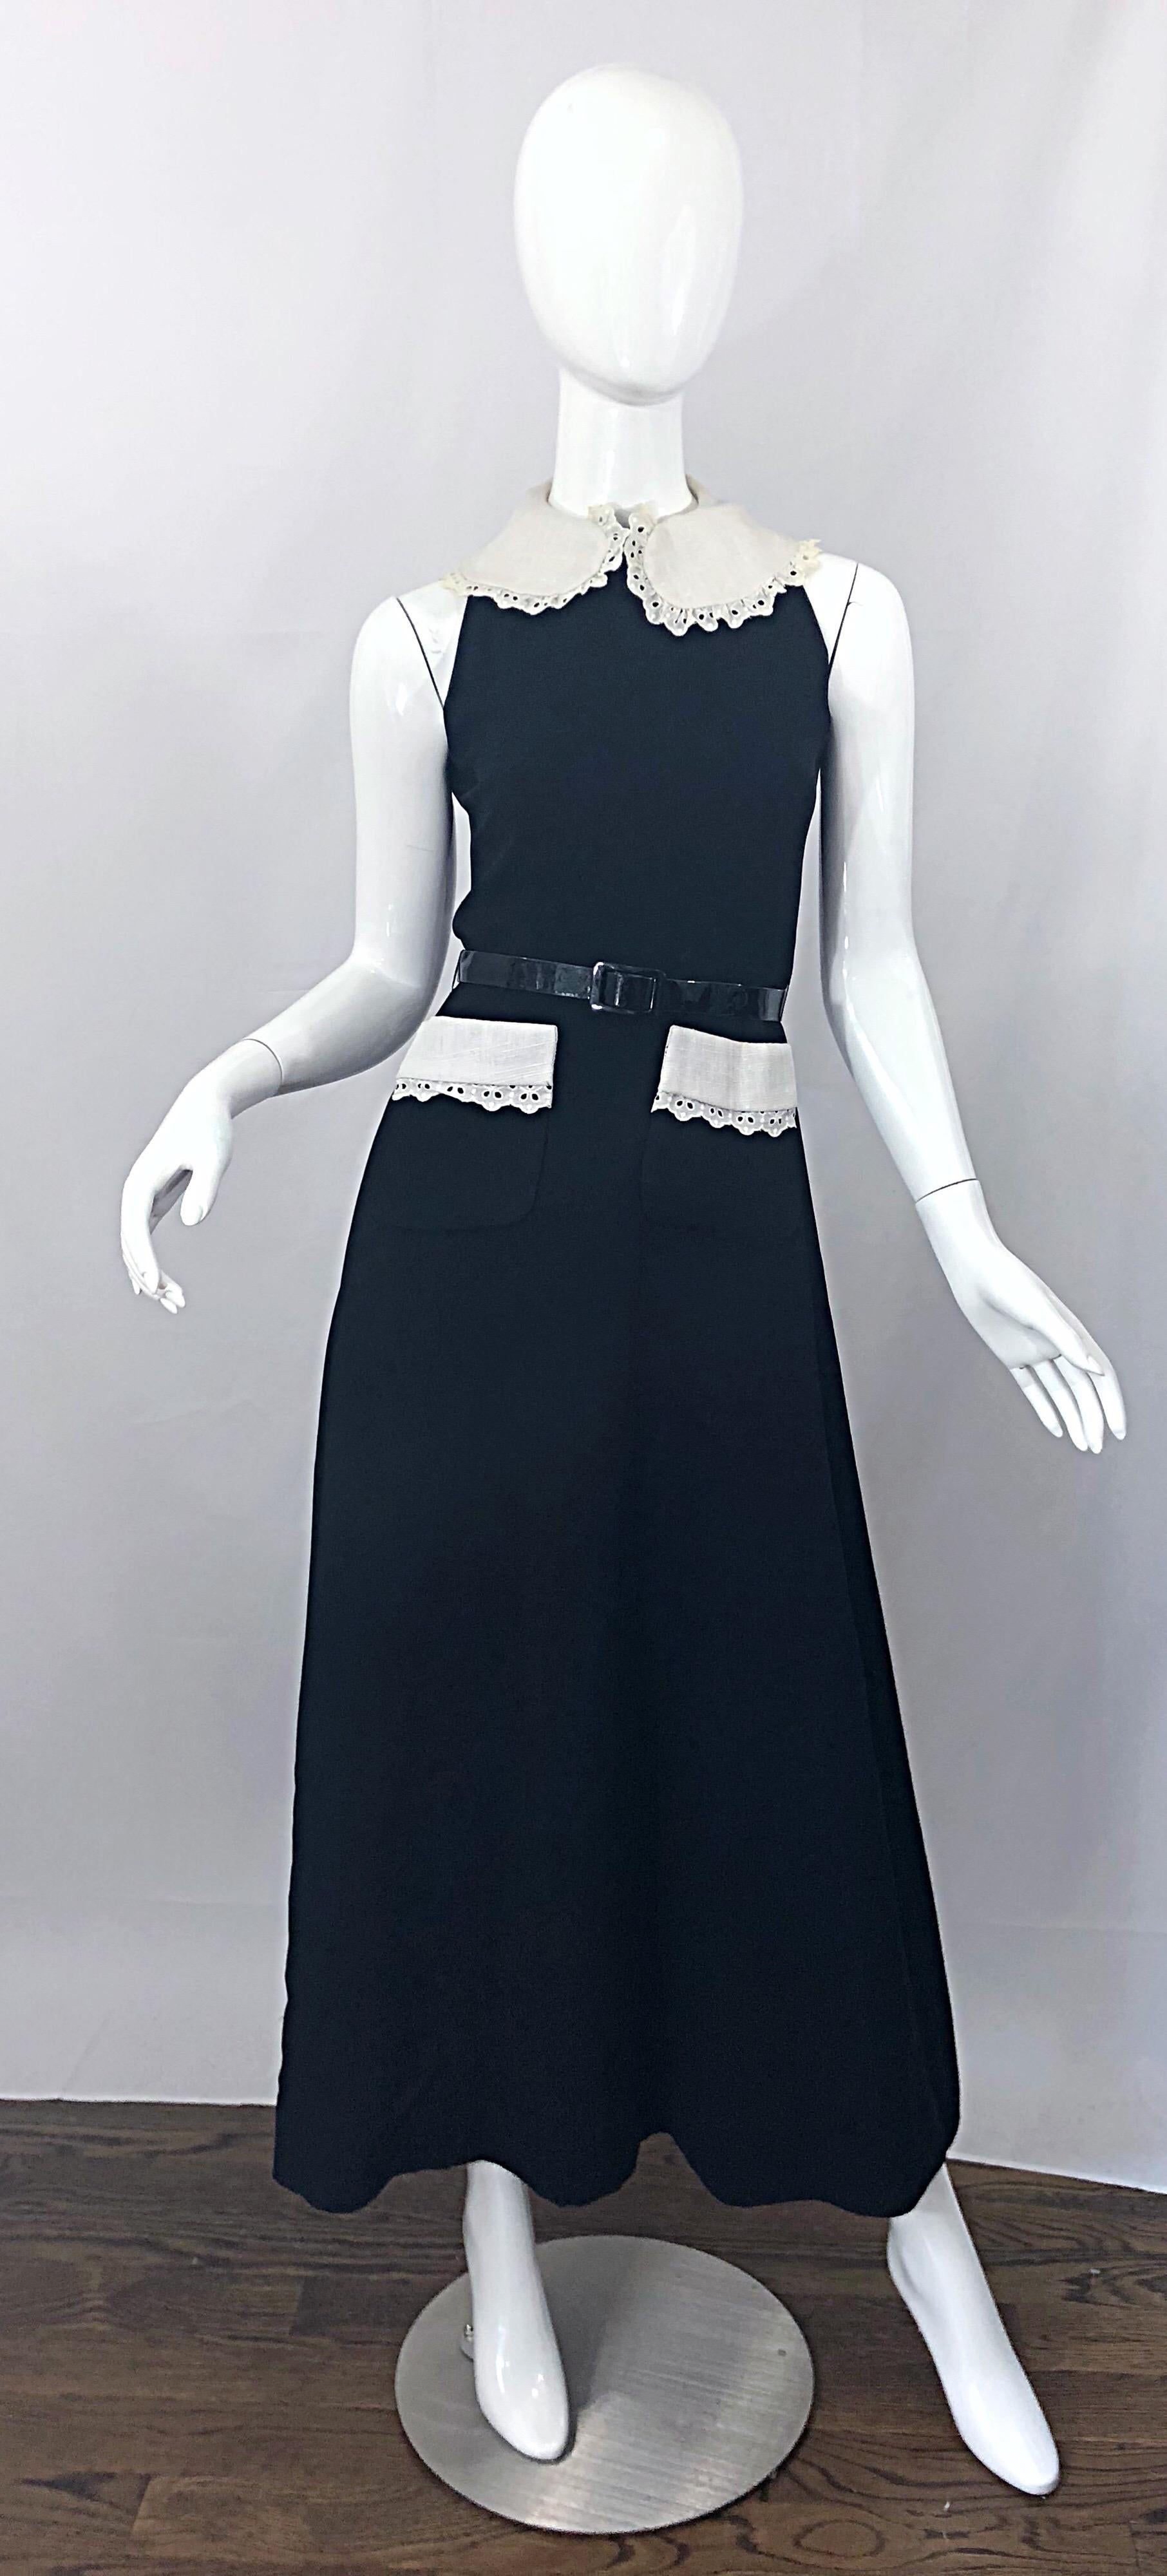 Beautiful early 1970s DONALD BROOKS black and white maxi dress gown ! Features a luxurious crepe rayon fabric that drapes wonderfully. Chic high neck with white linen eyelet collar, with matching white eyelet trim on each pocket at the waist.